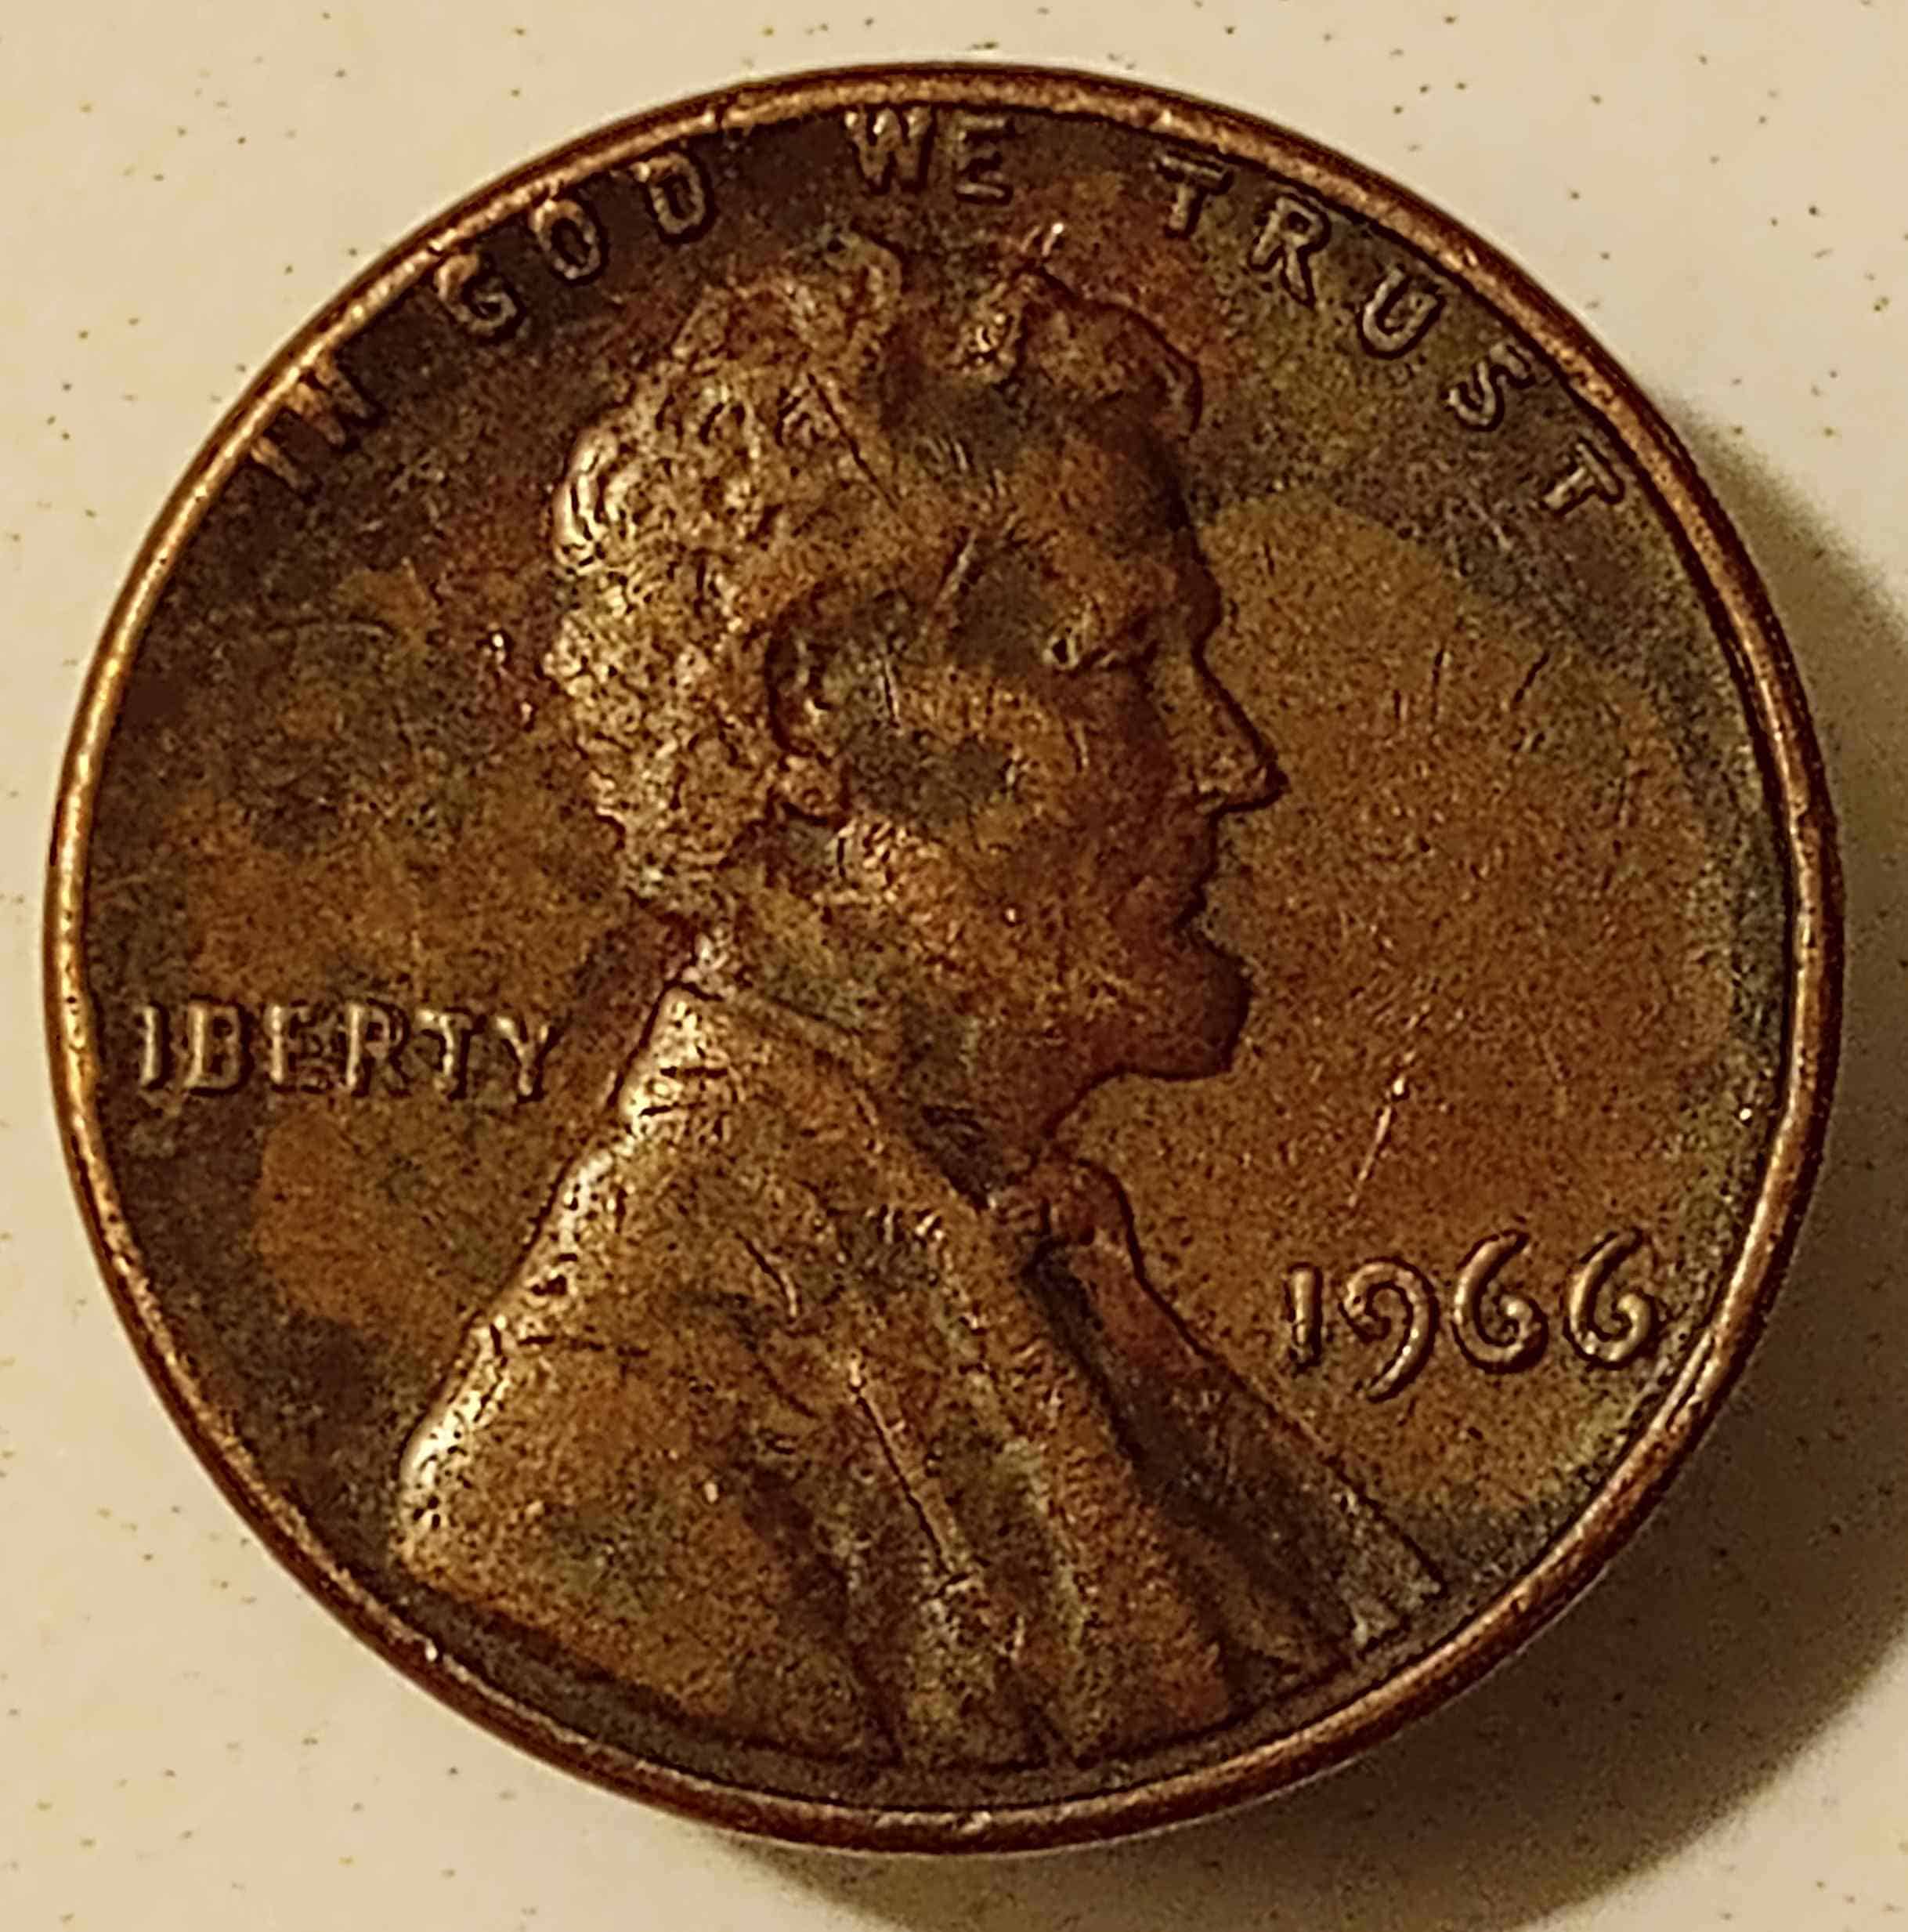 How To Tell If A Penny Is Bronze